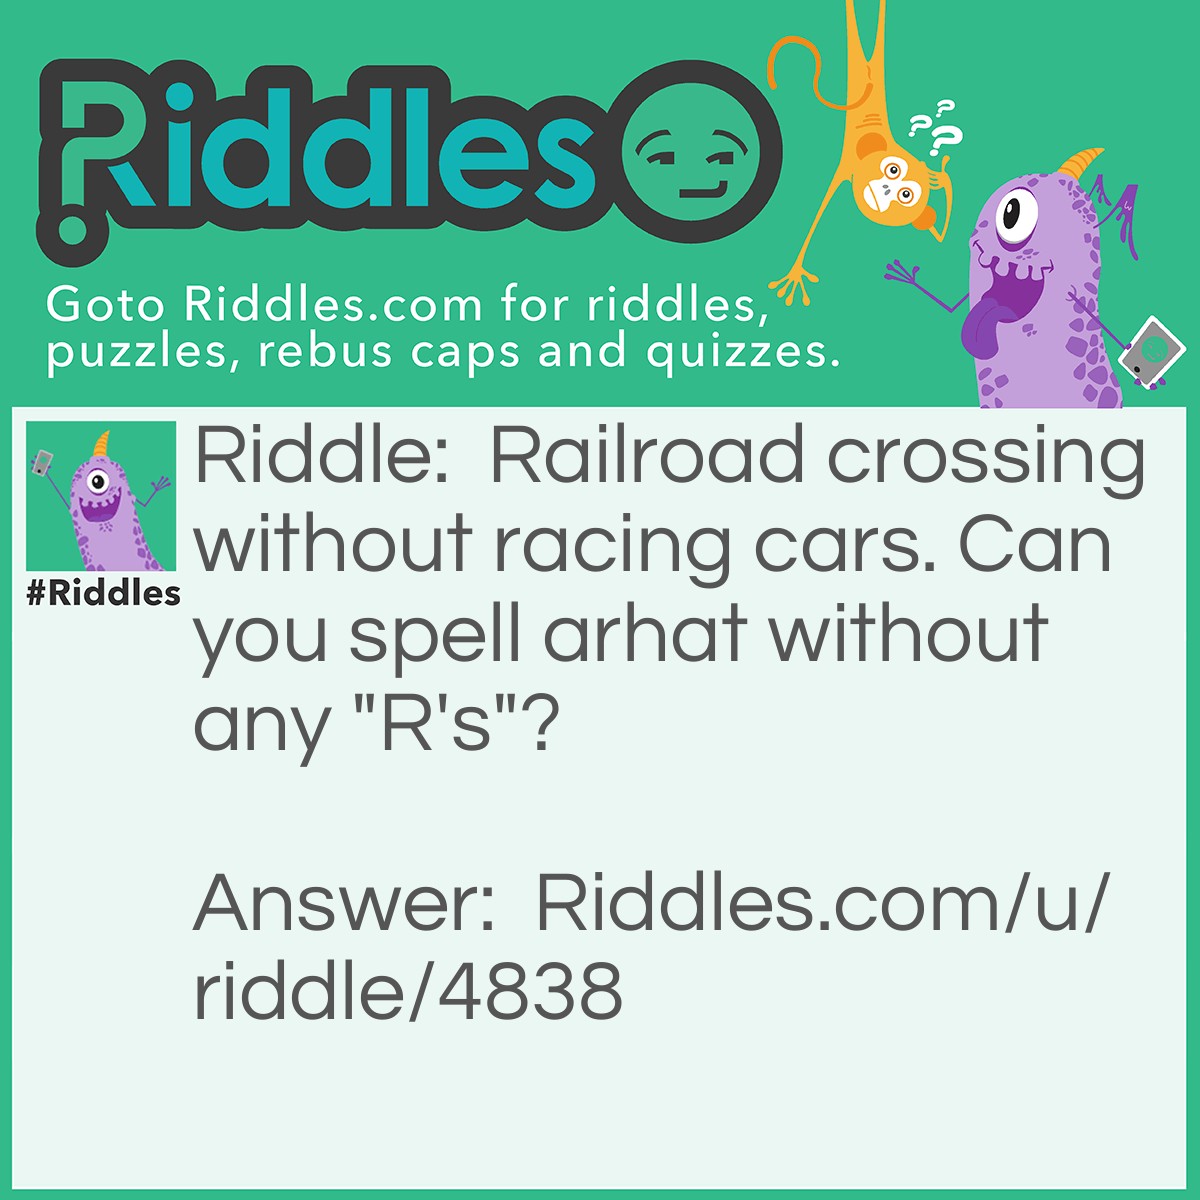 Riddle: Railroad crossing without racing cars. Can you spell arhat without any "R's"? Answer: T-H-A-T.